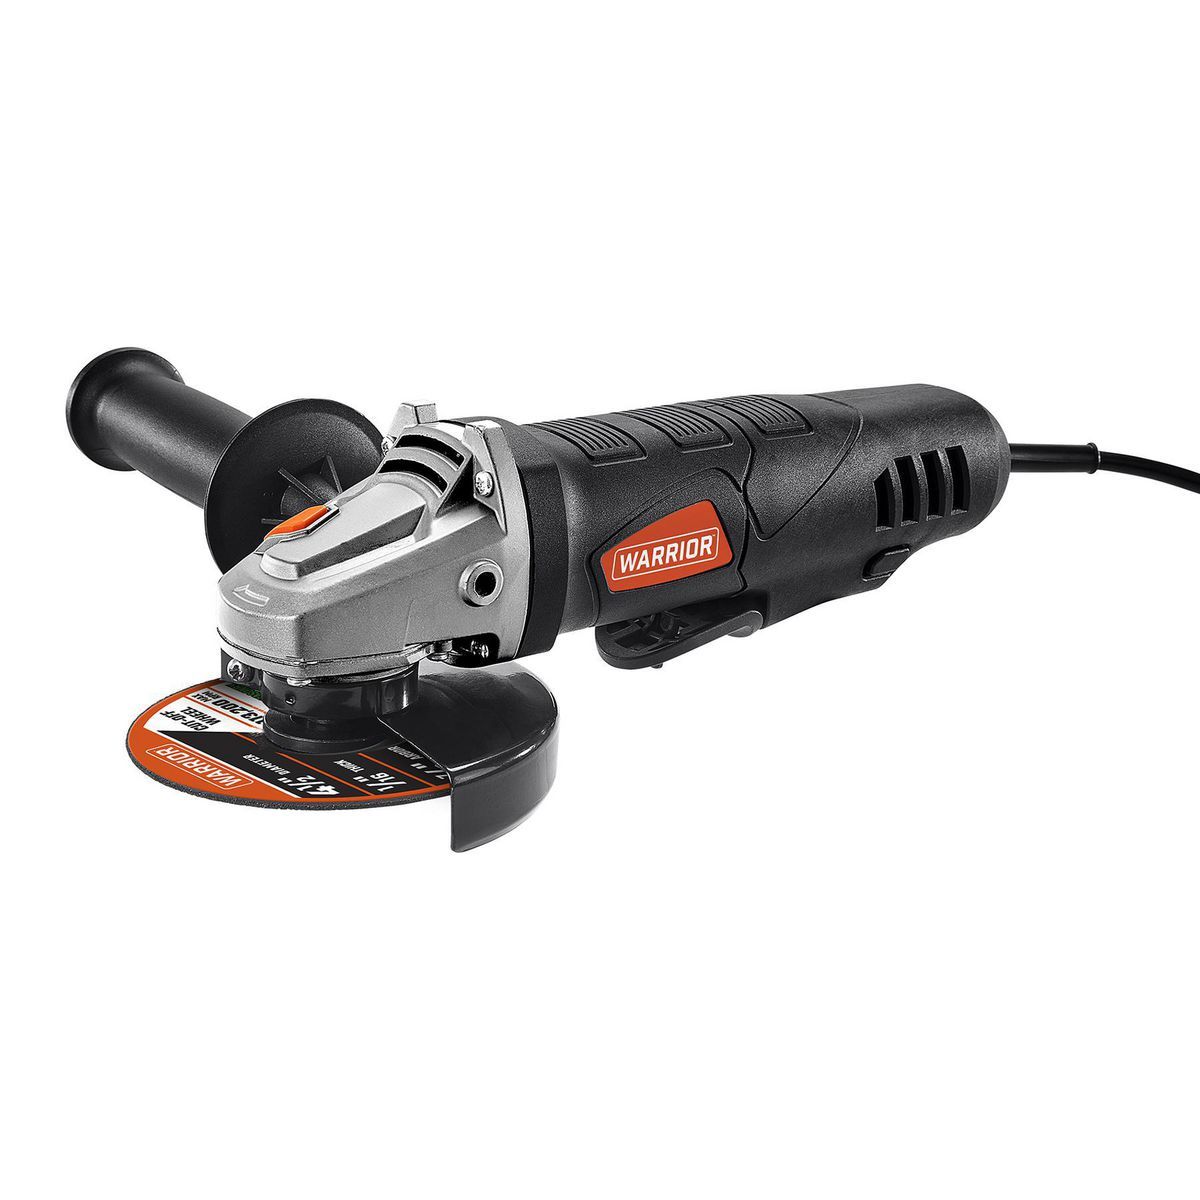 WARRIOR 6 Amp, 4-1/2 in. Paddle Switch Angle Grinder